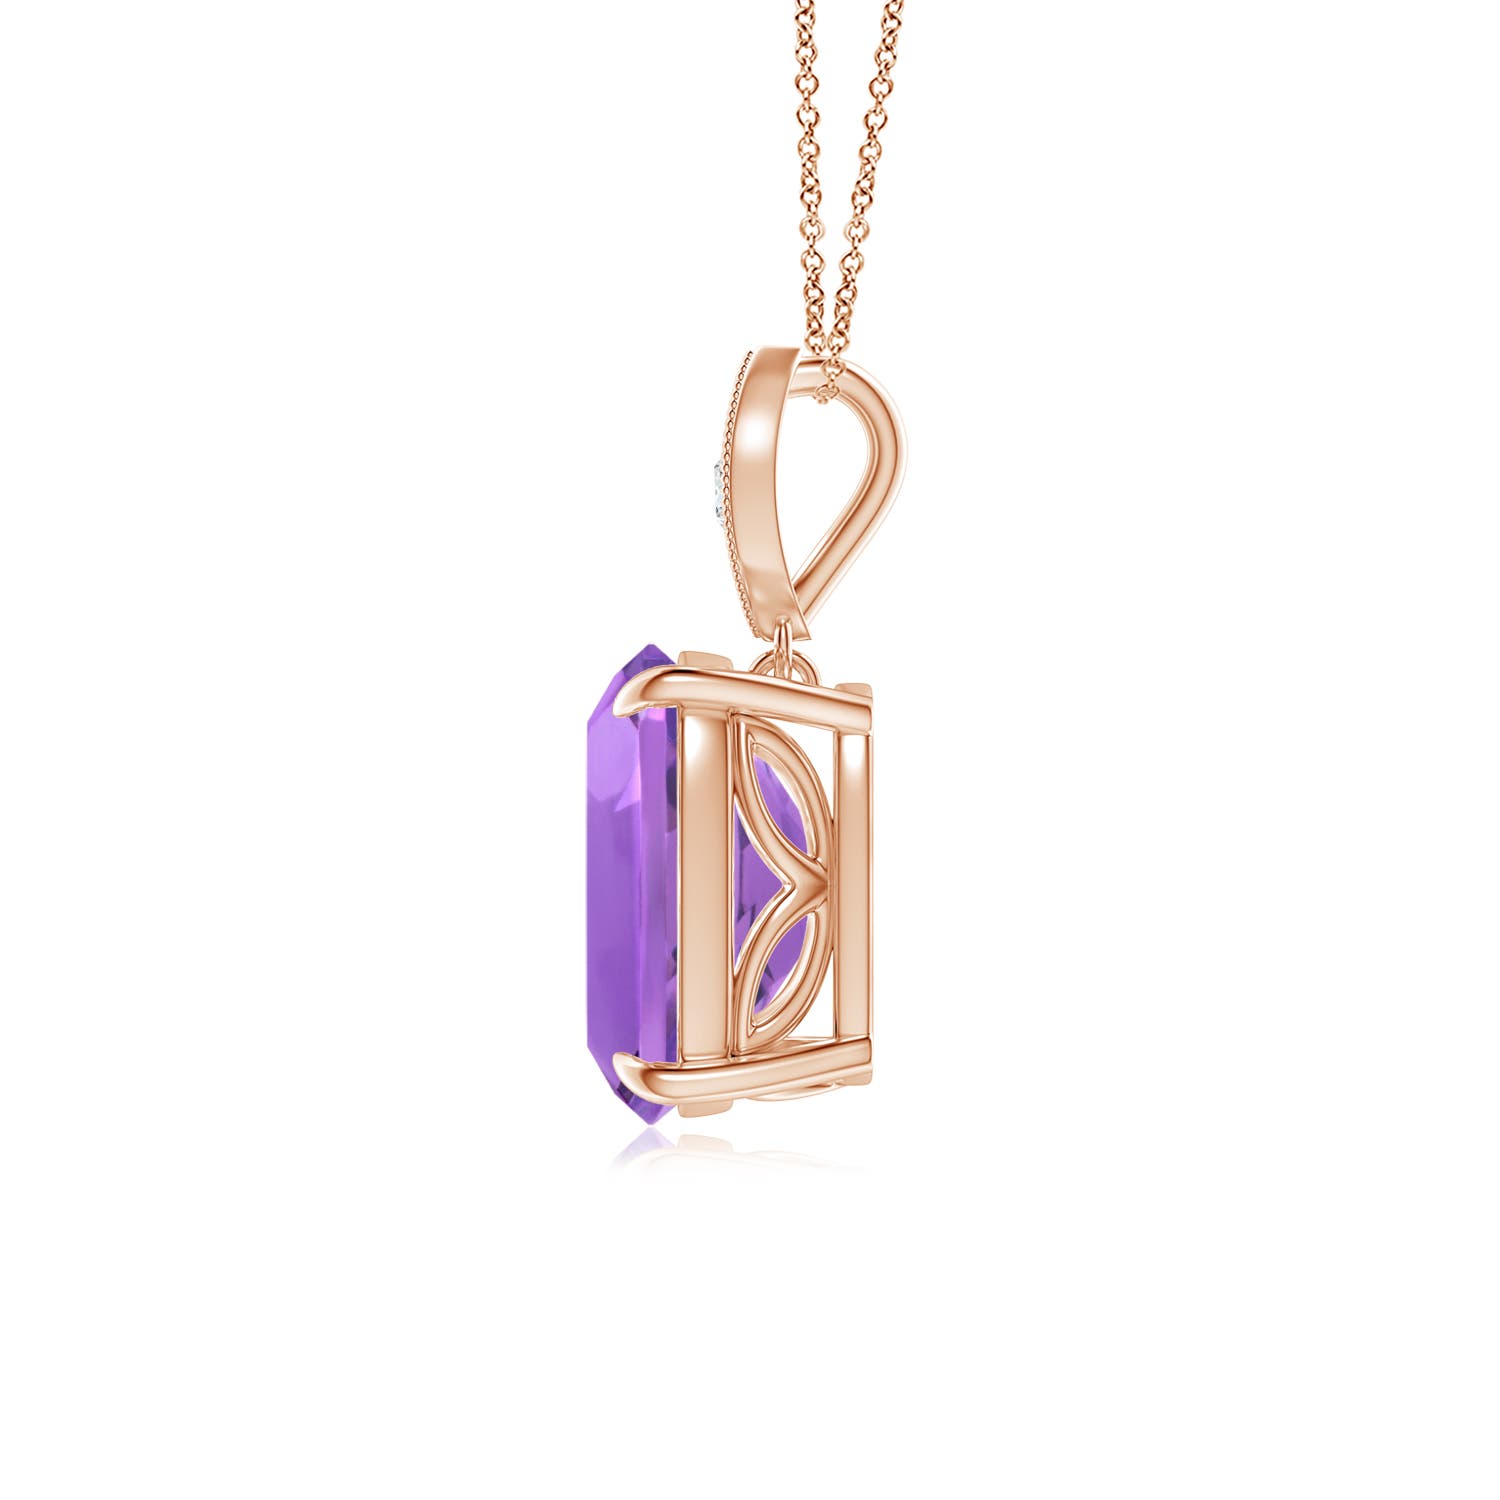 AA - Amethyst / 2.03 CT / 14 KT Rose Gold